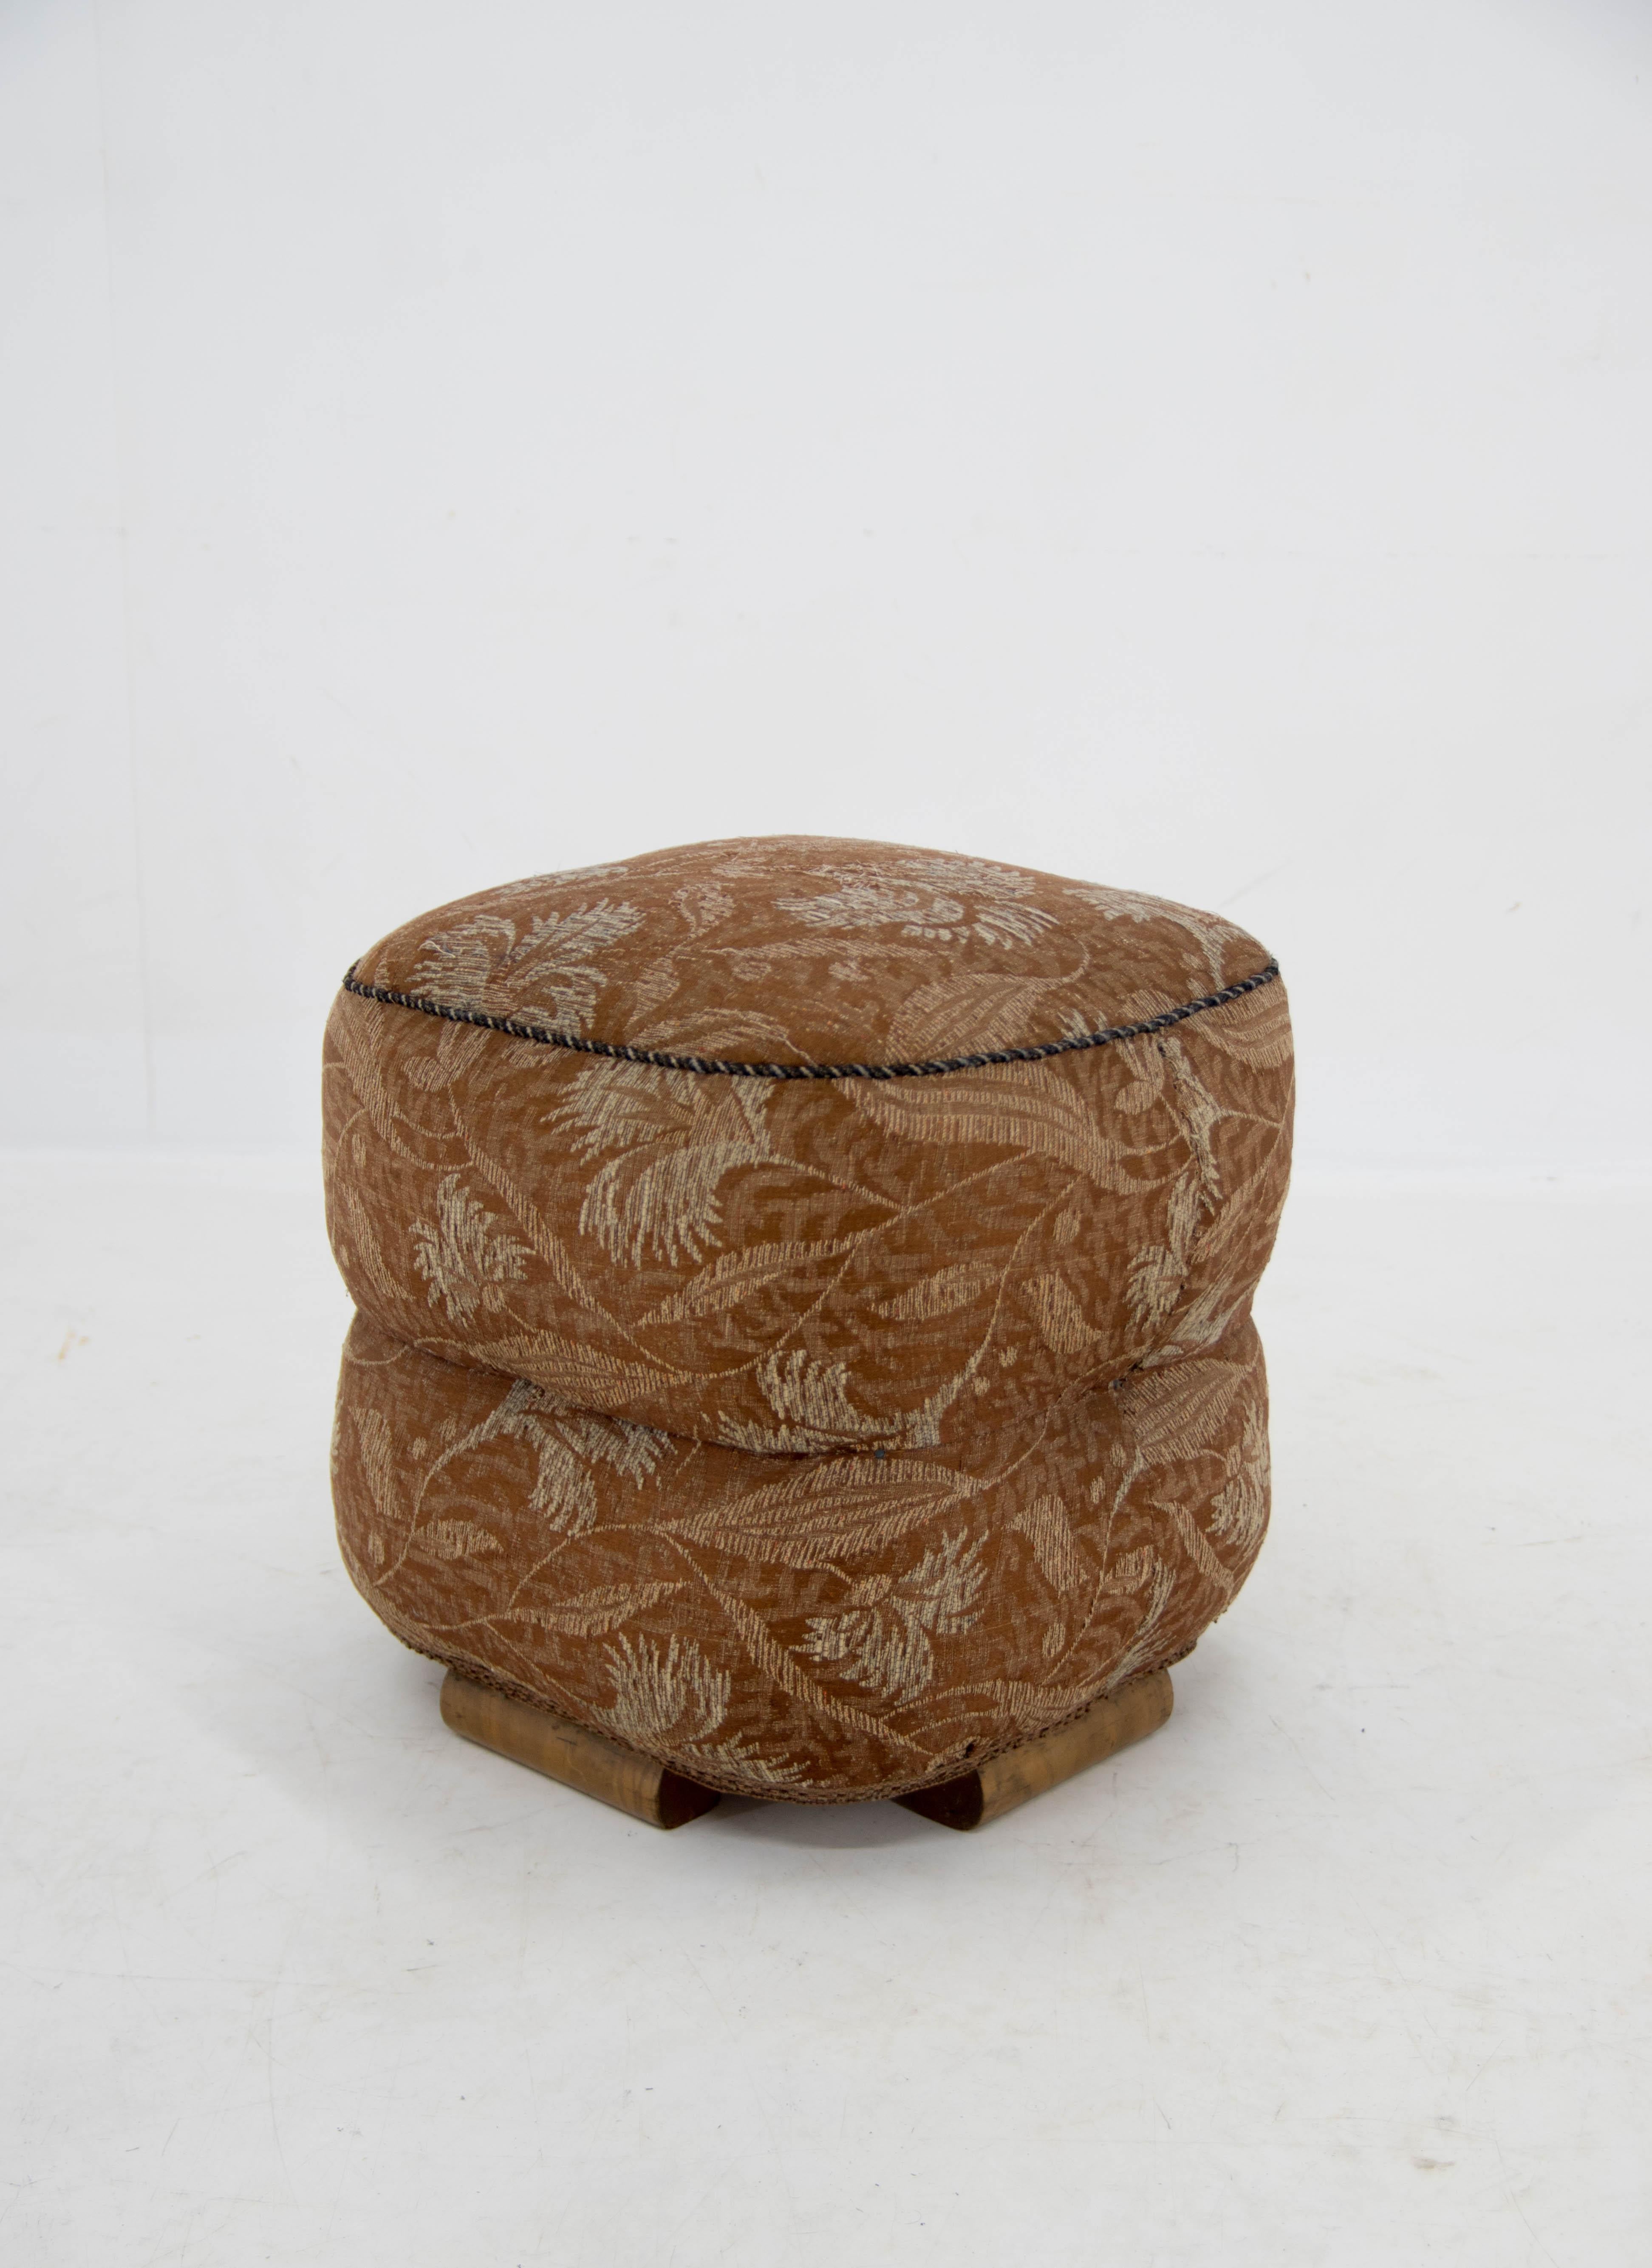 Art Deco tabouret with floral motif made in Czechoslovakia in 1930s
Made of wood, fabric. Condition of the upholstery according to age..
Sturdy and stabile.